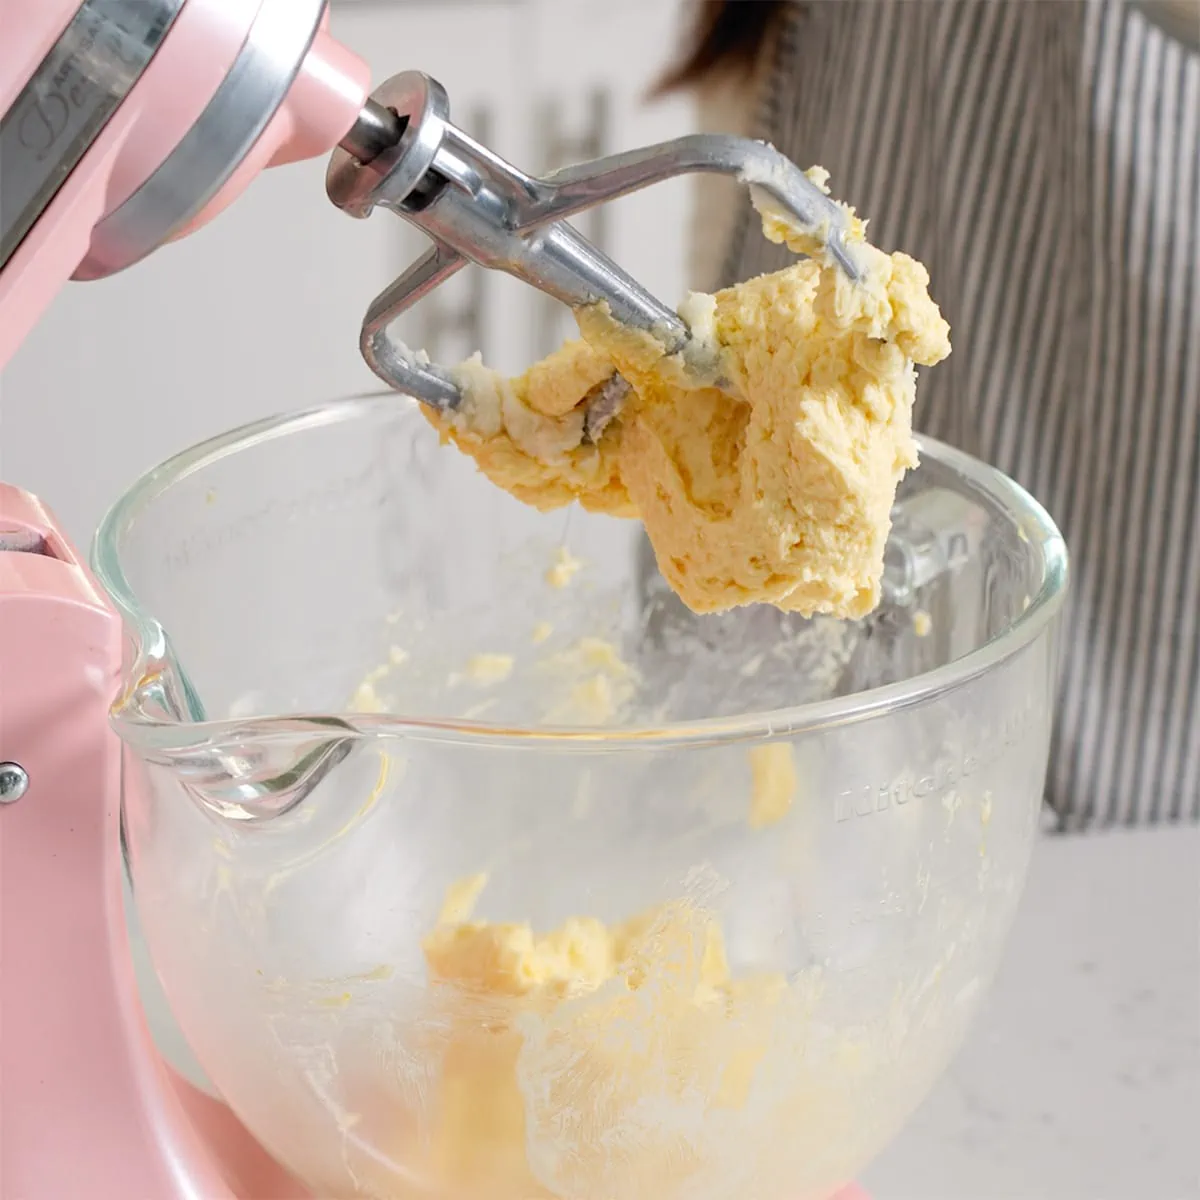 Eggs and vanilla extract mixed into butter and sugar inside a stand mixer.